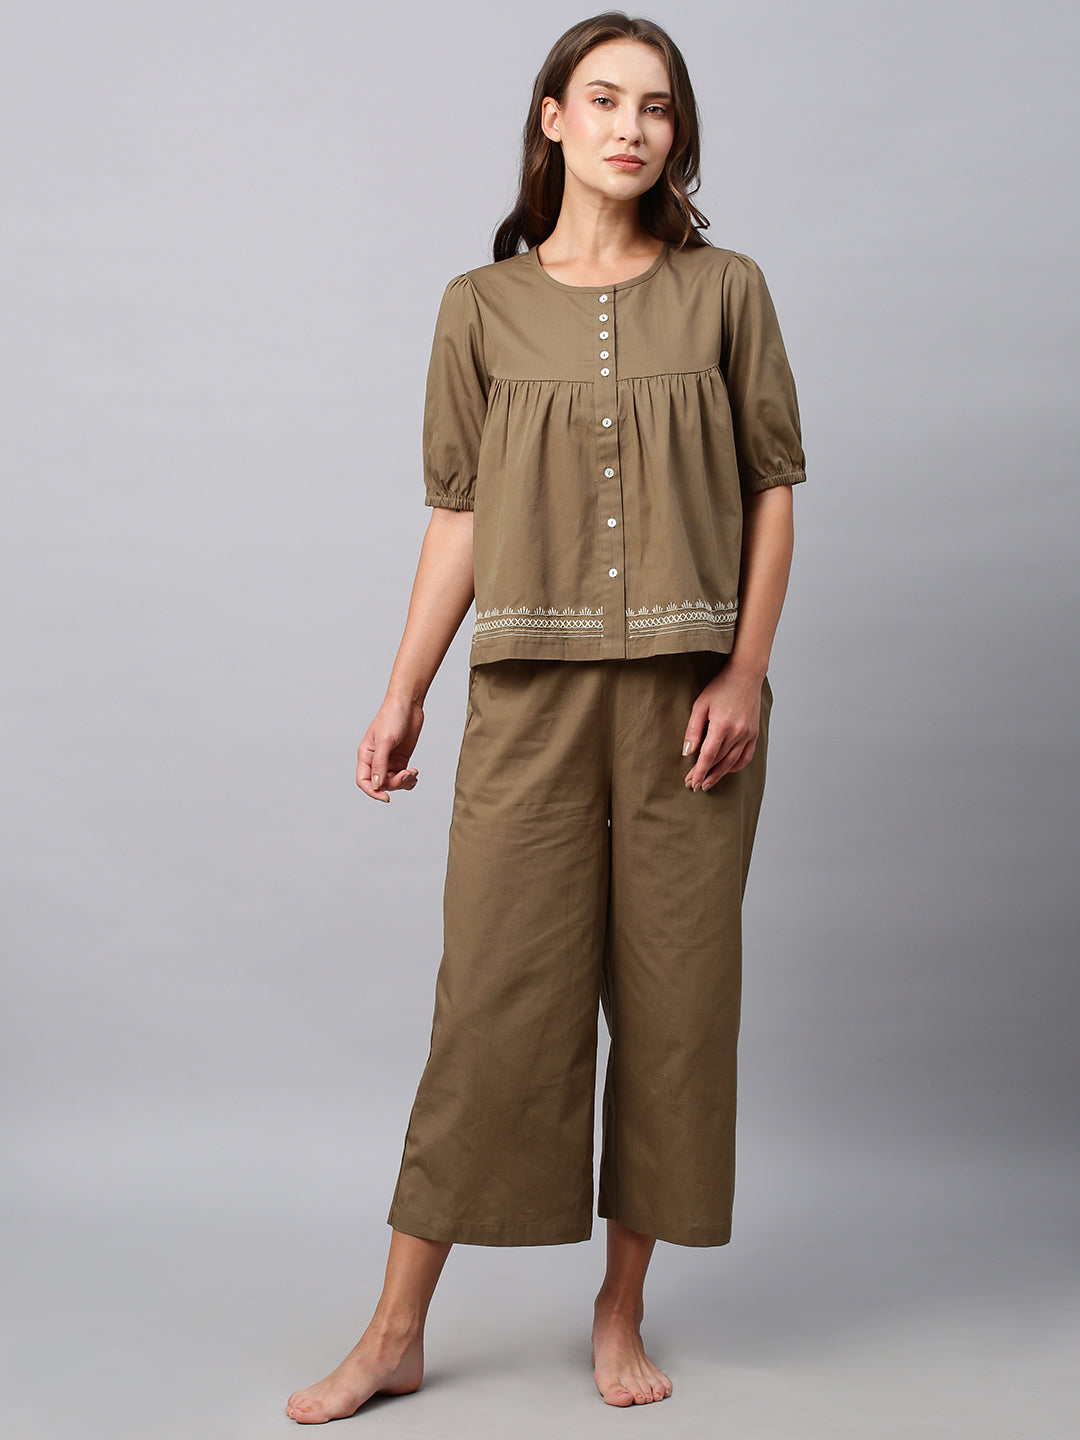 Crisp Poplin Co-Ord Set  With An Embroidered Swing Basque Top And Cropped Pj's